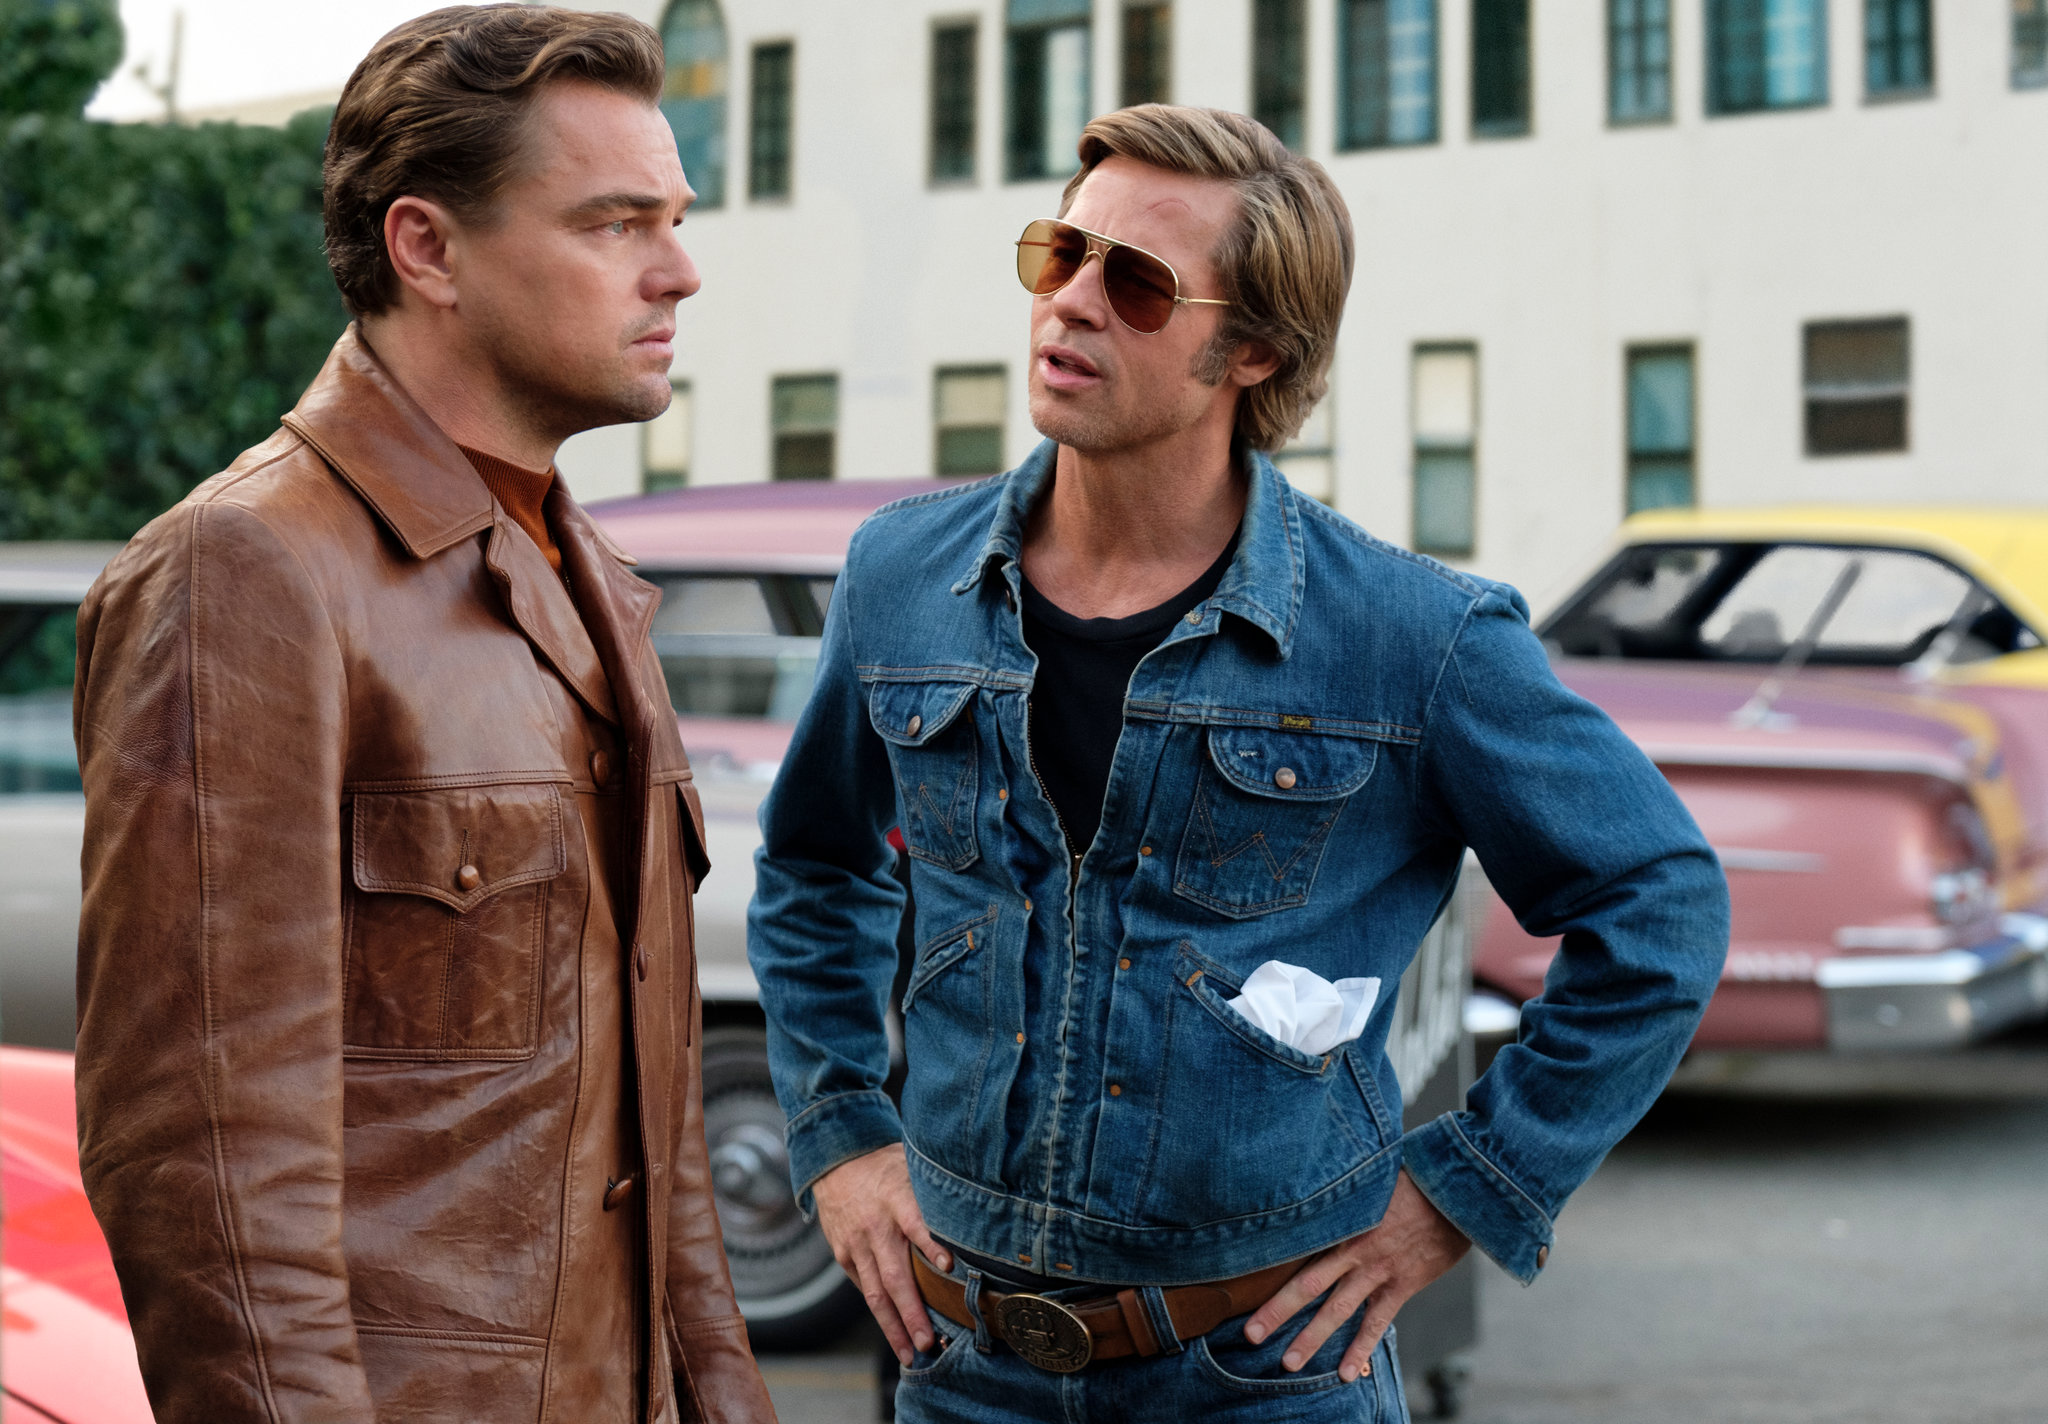 Brad Pitt and Leonardo DiCaprio in a scene of 'Once Upon a Time in Hollywood"